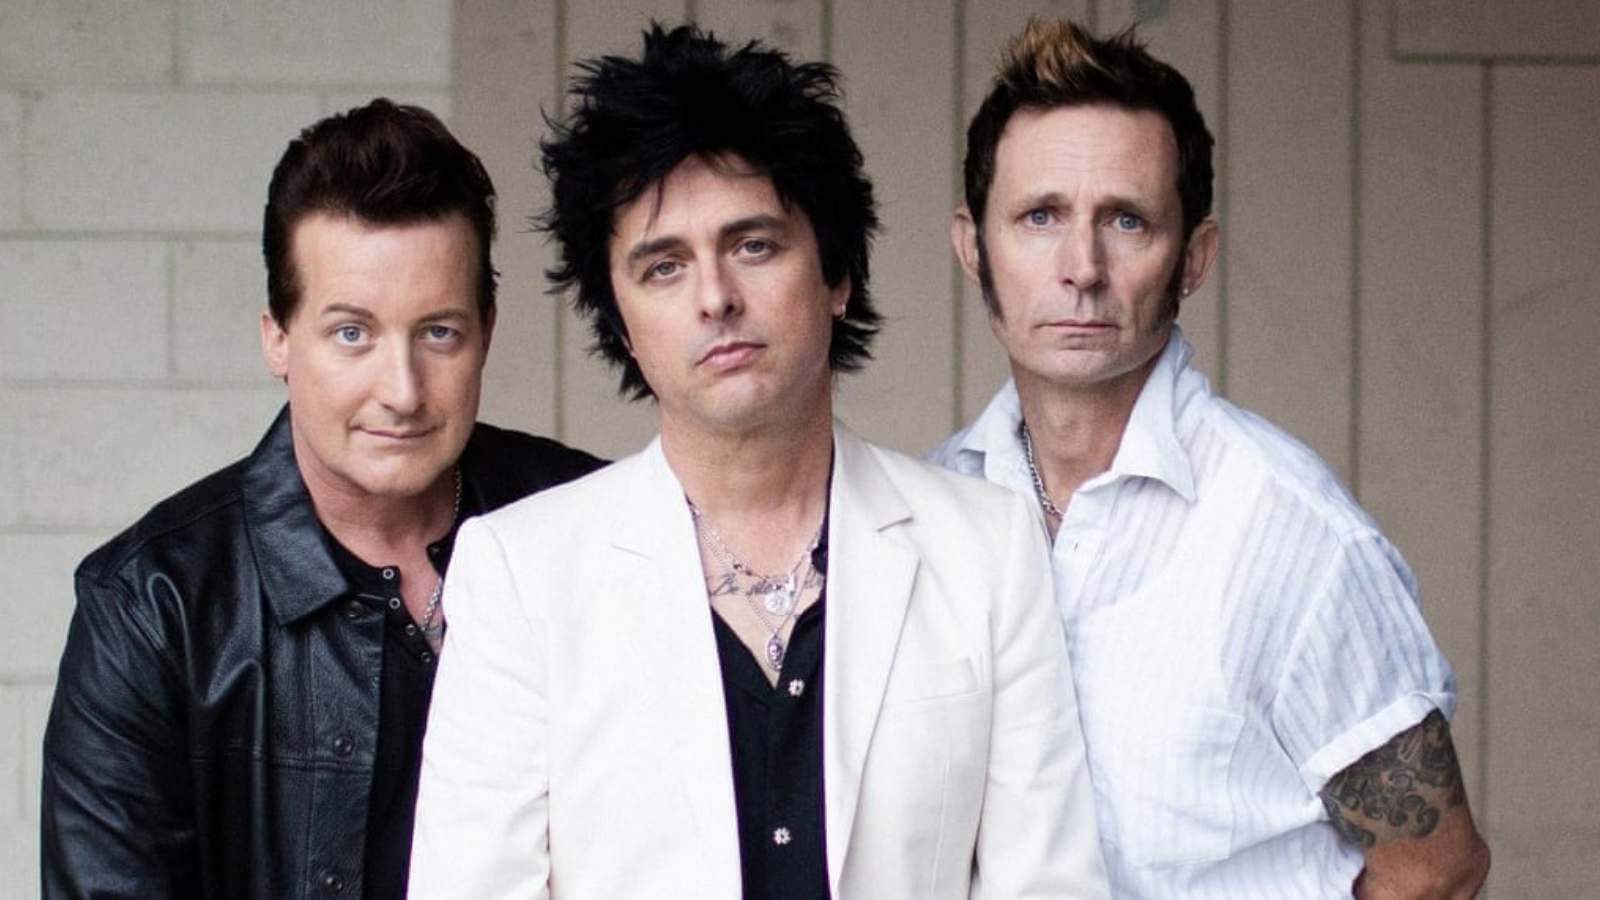 Green Day Is The Band Still Together?